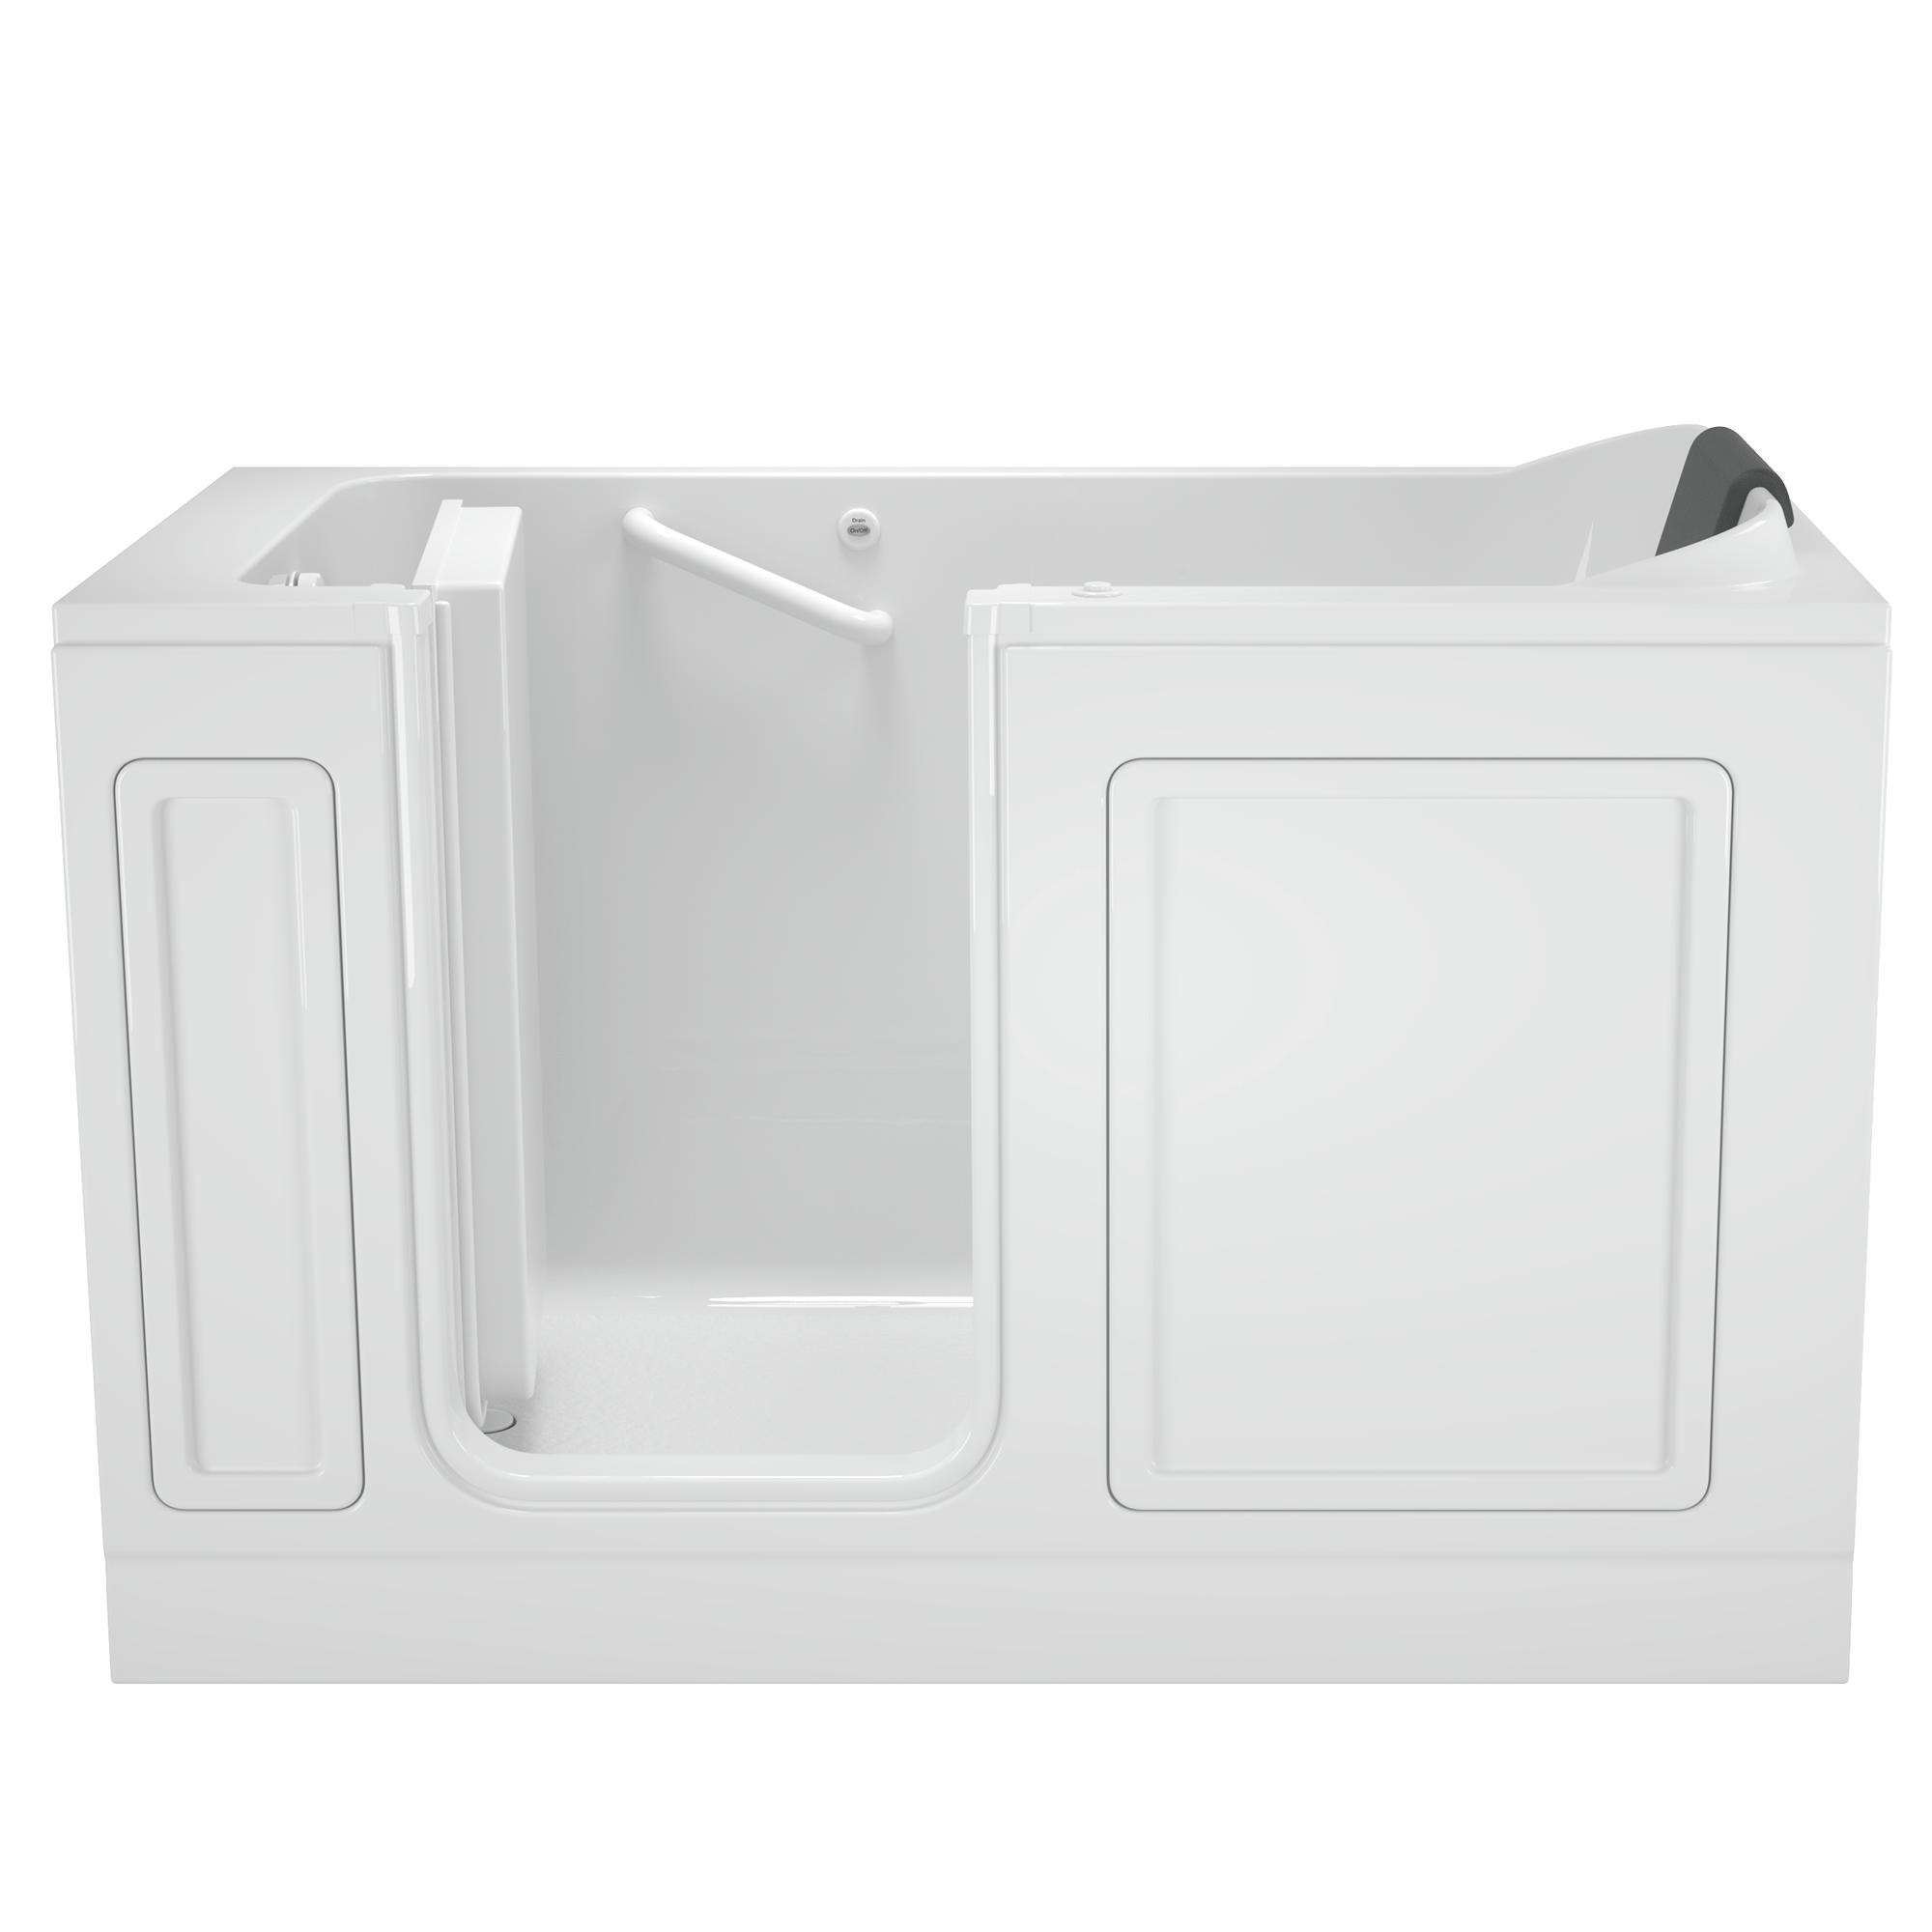 Acrylic Luxury Series 32 x 60  Inch Walk in Tub With Air Spa System   Left Hand Drain WIB WHITE